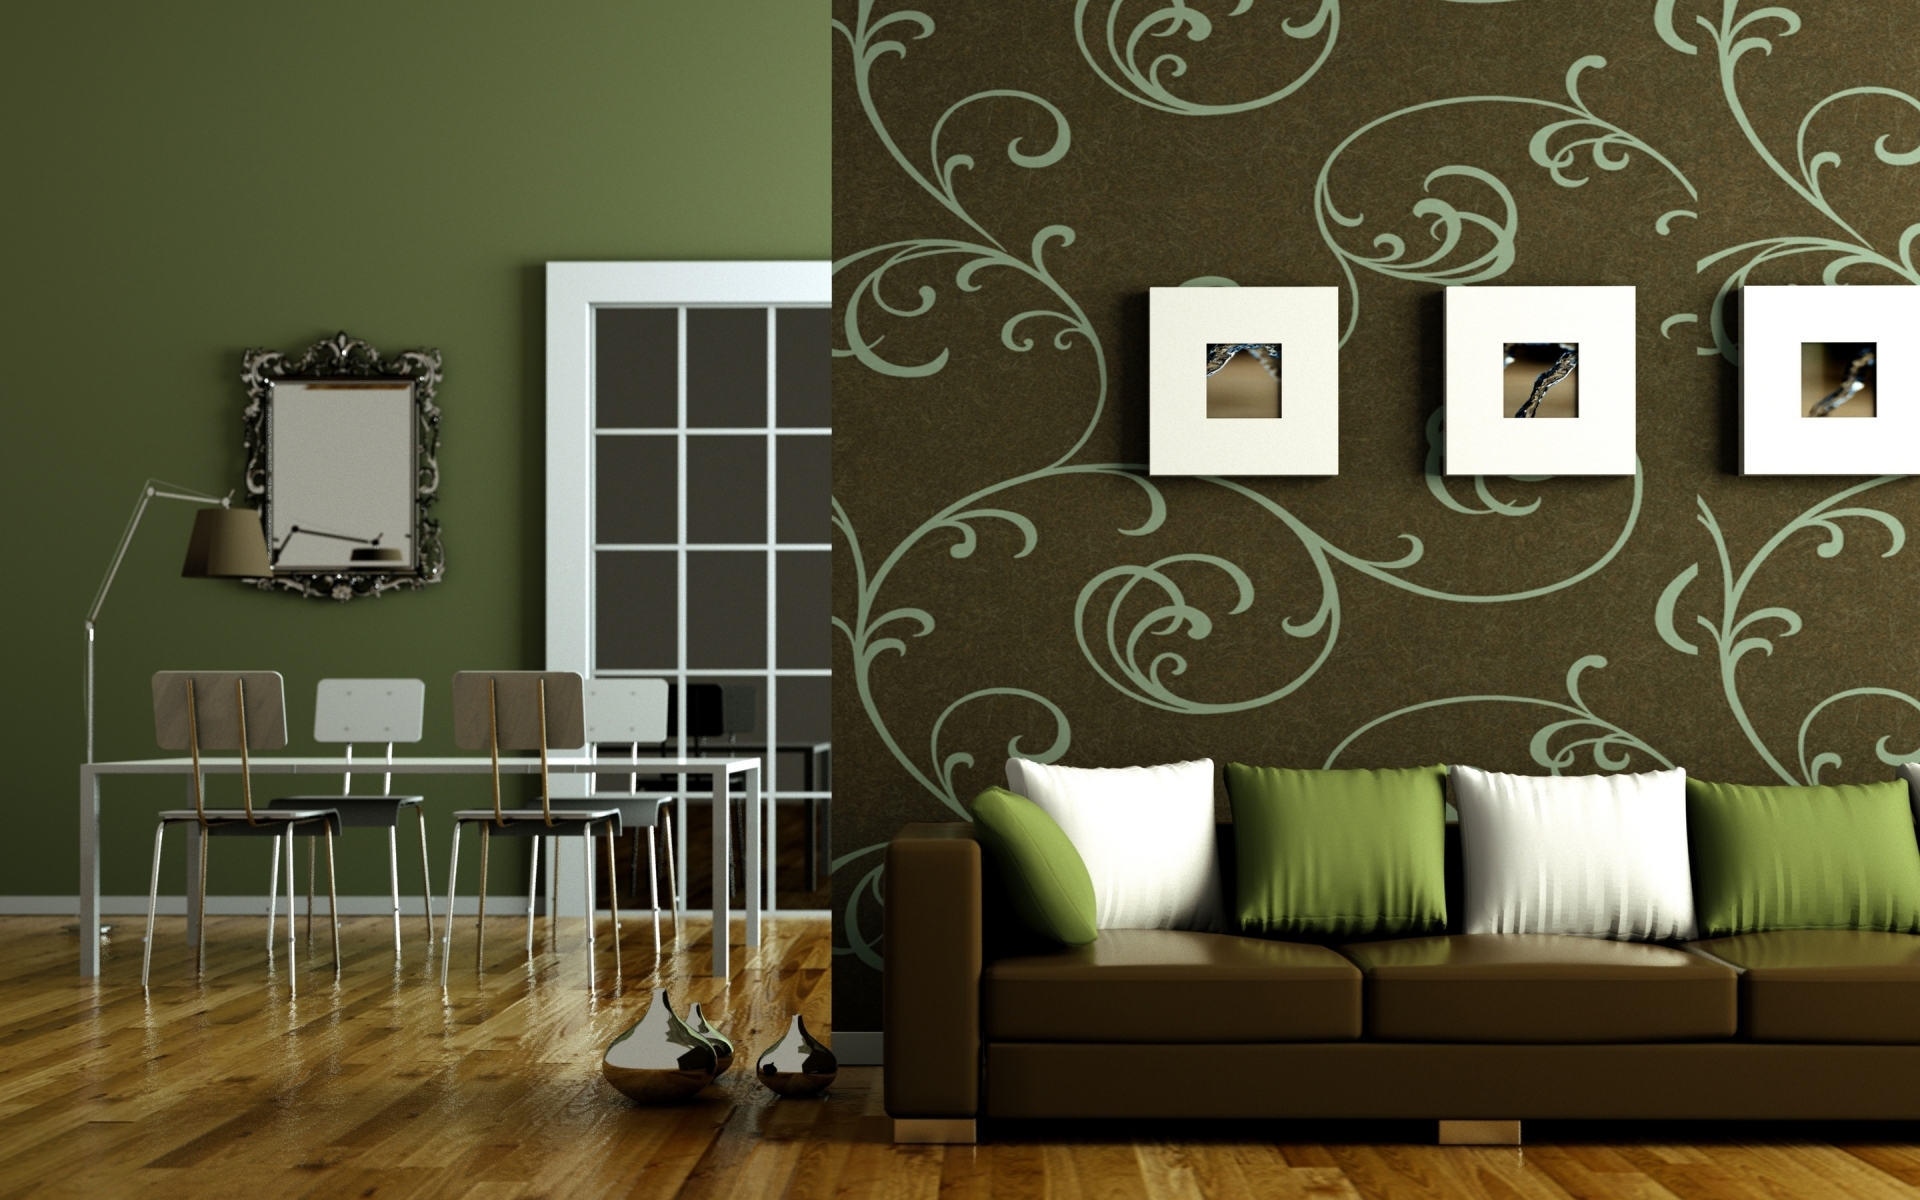 Heres 40 interior design ideas as desktop wallpapers that you can 1920x1200